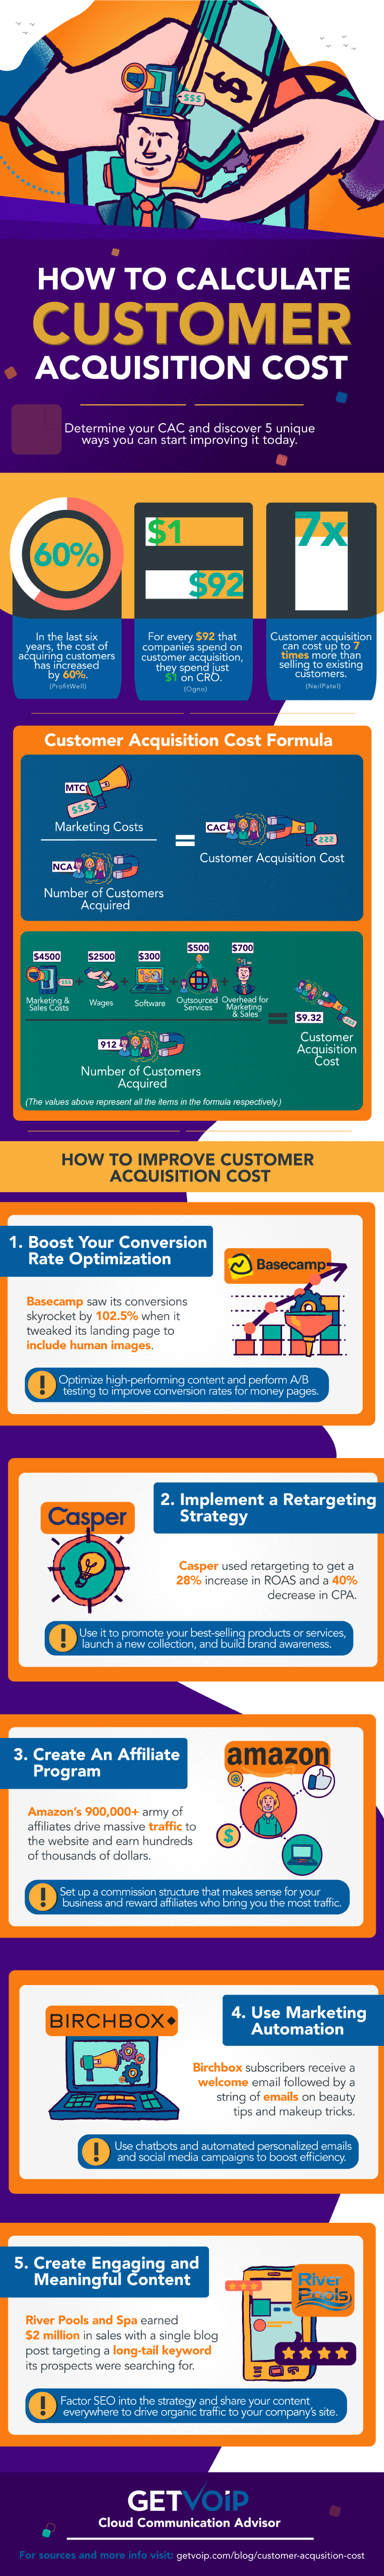 How to Calculate Customer Acquisition Cost Formula